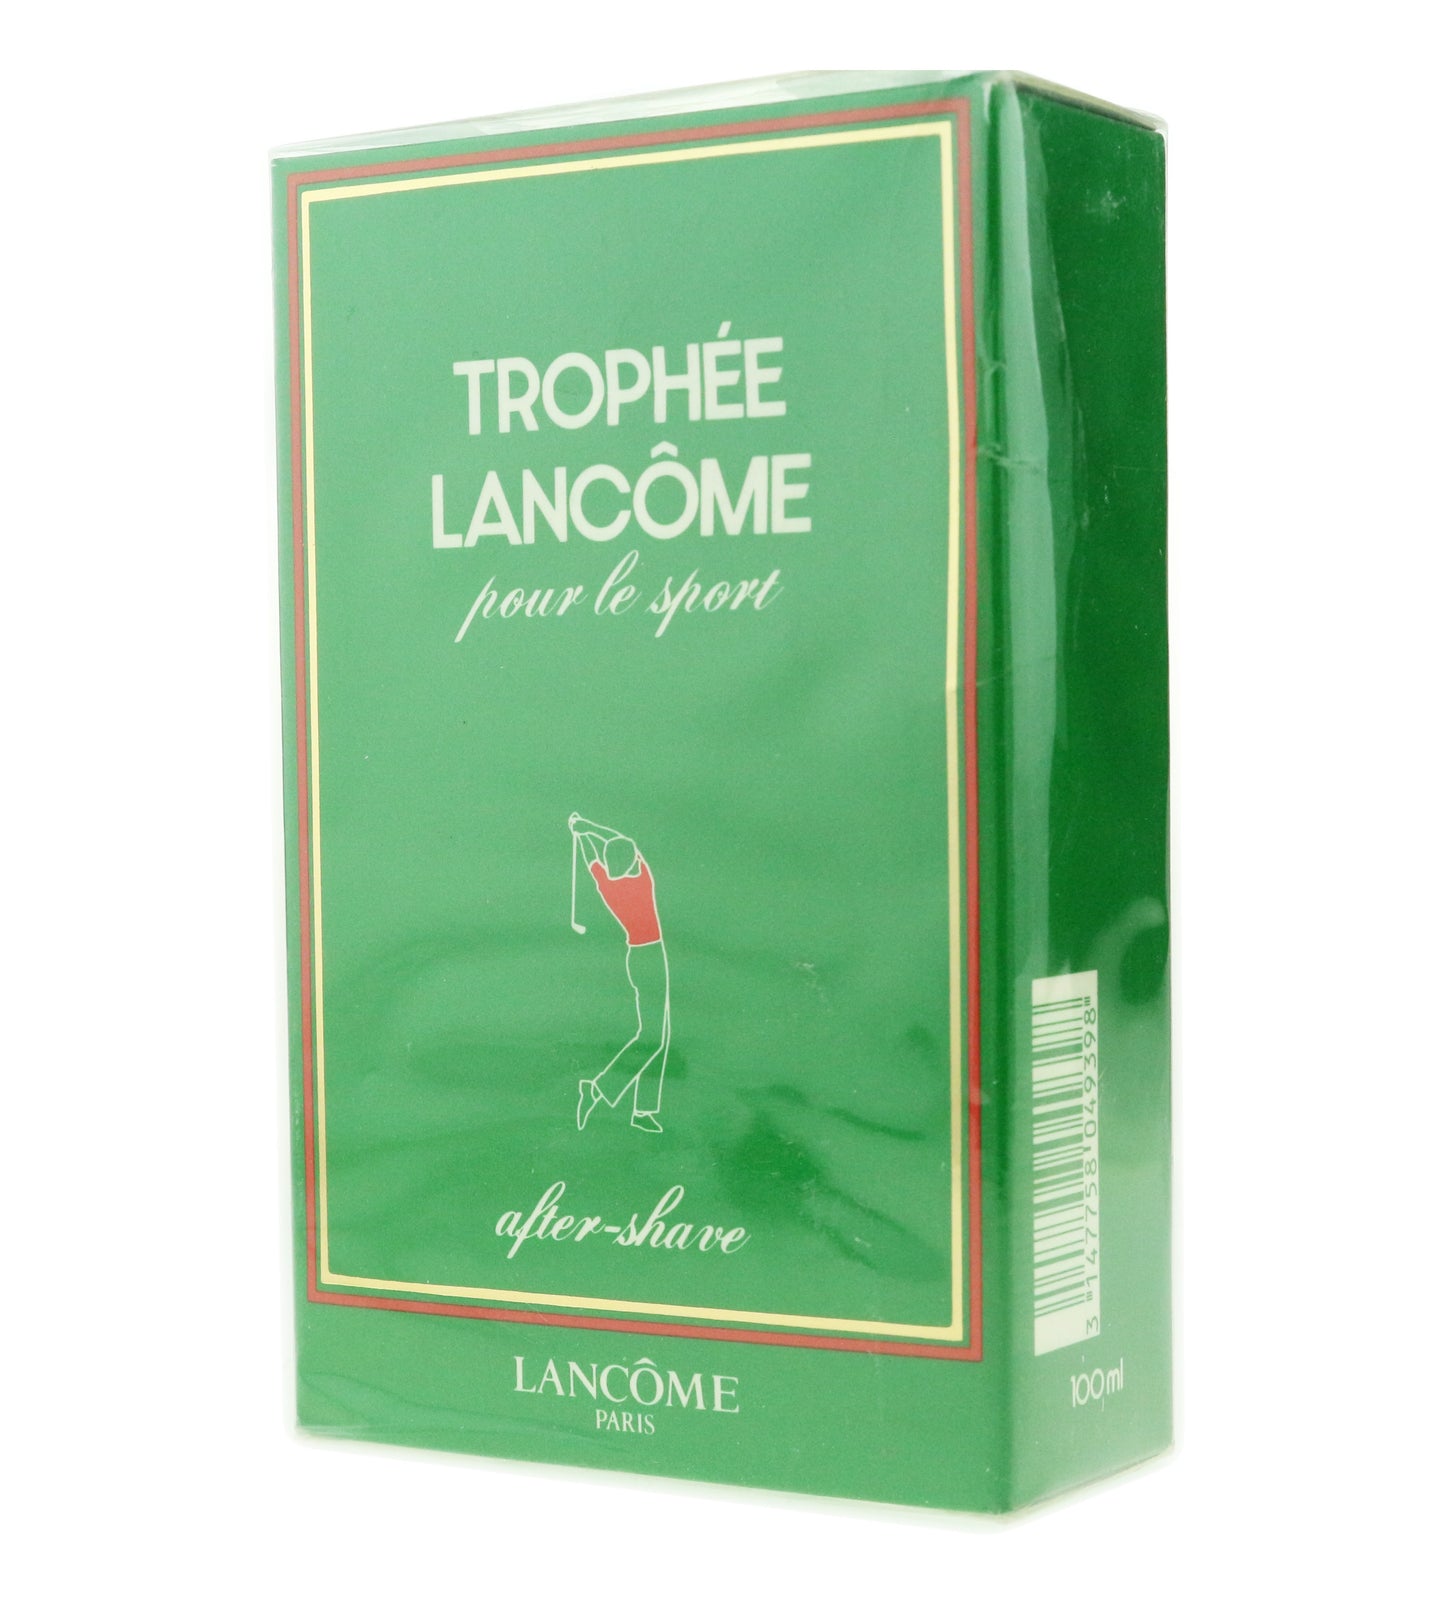 Trophee Lancome After Shave 100 ml